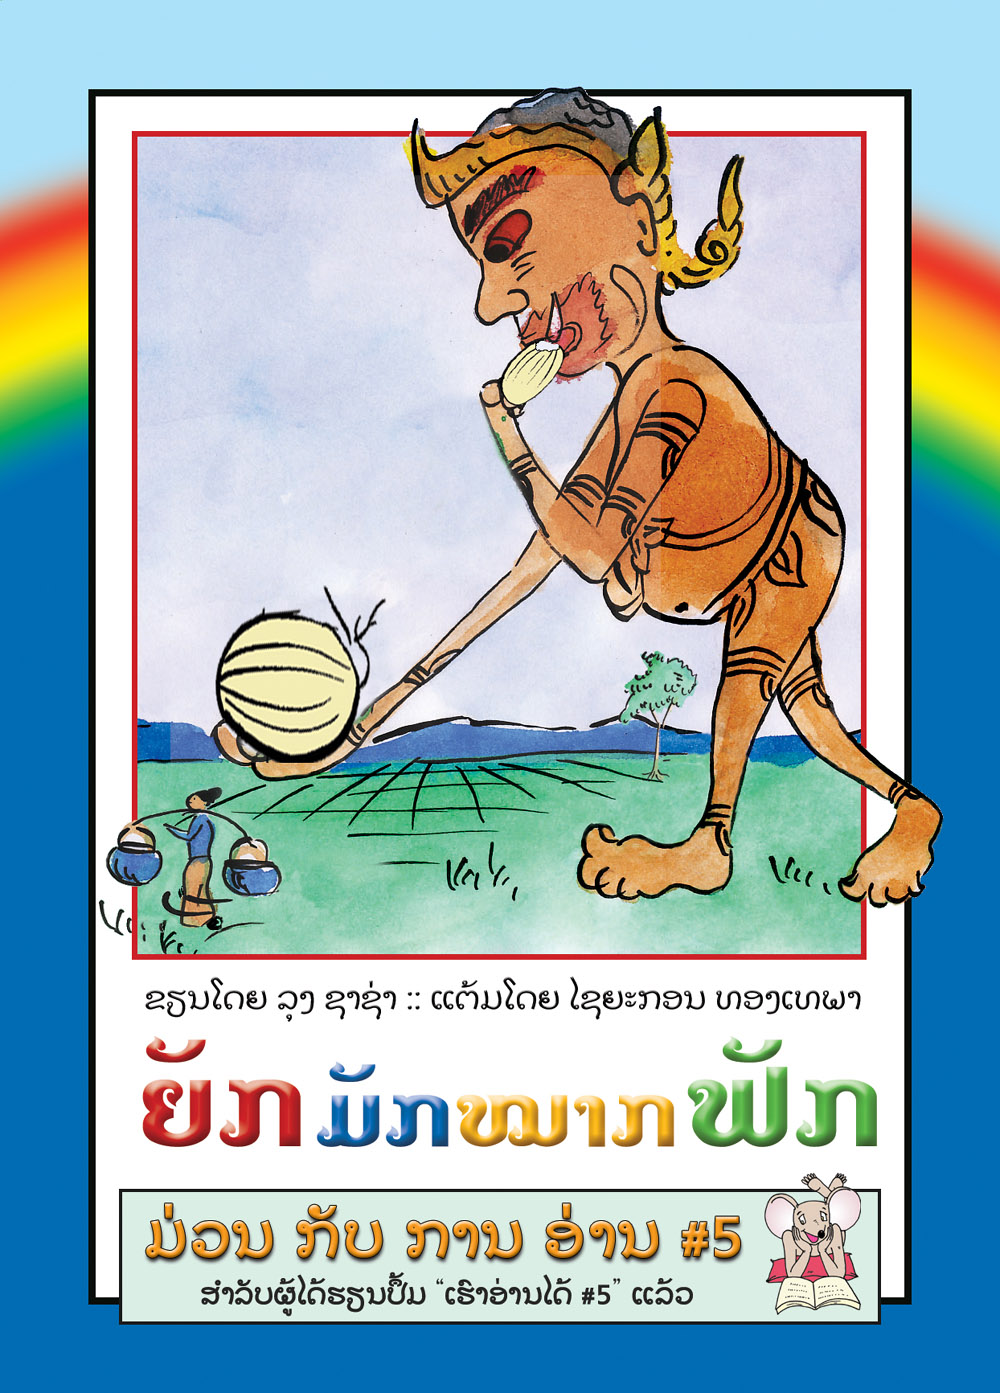 The Giant Likes Pumpkins large book cover, published in Lao language